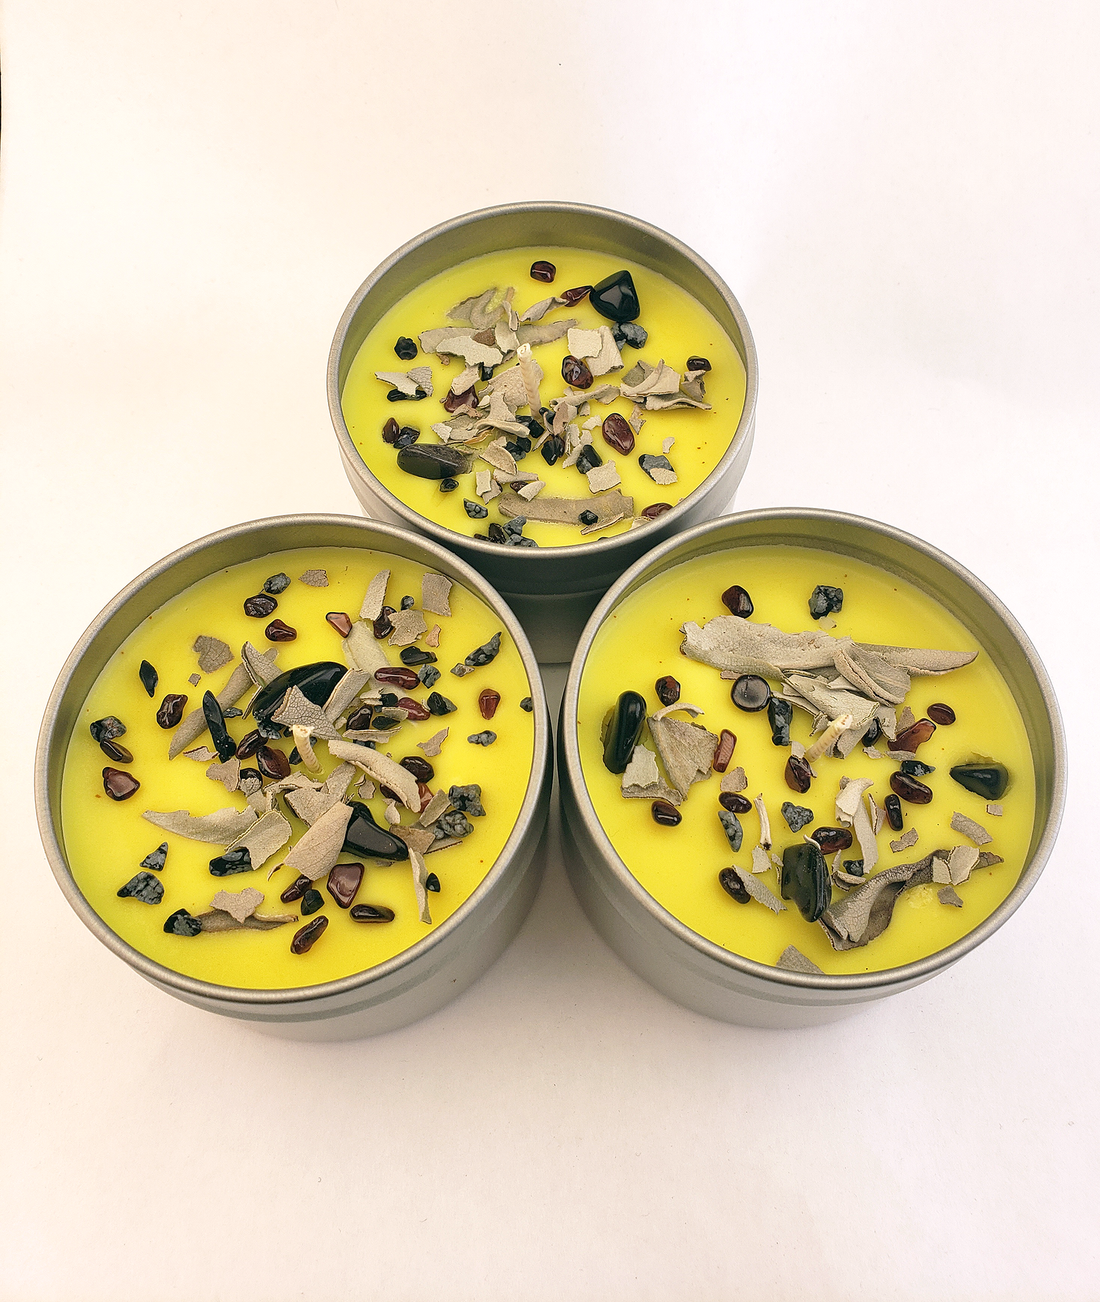 Supernatural Shield - 4oz Soy Wax Handmade Scented Candle - Palo Santo Essential Oils - White Sage